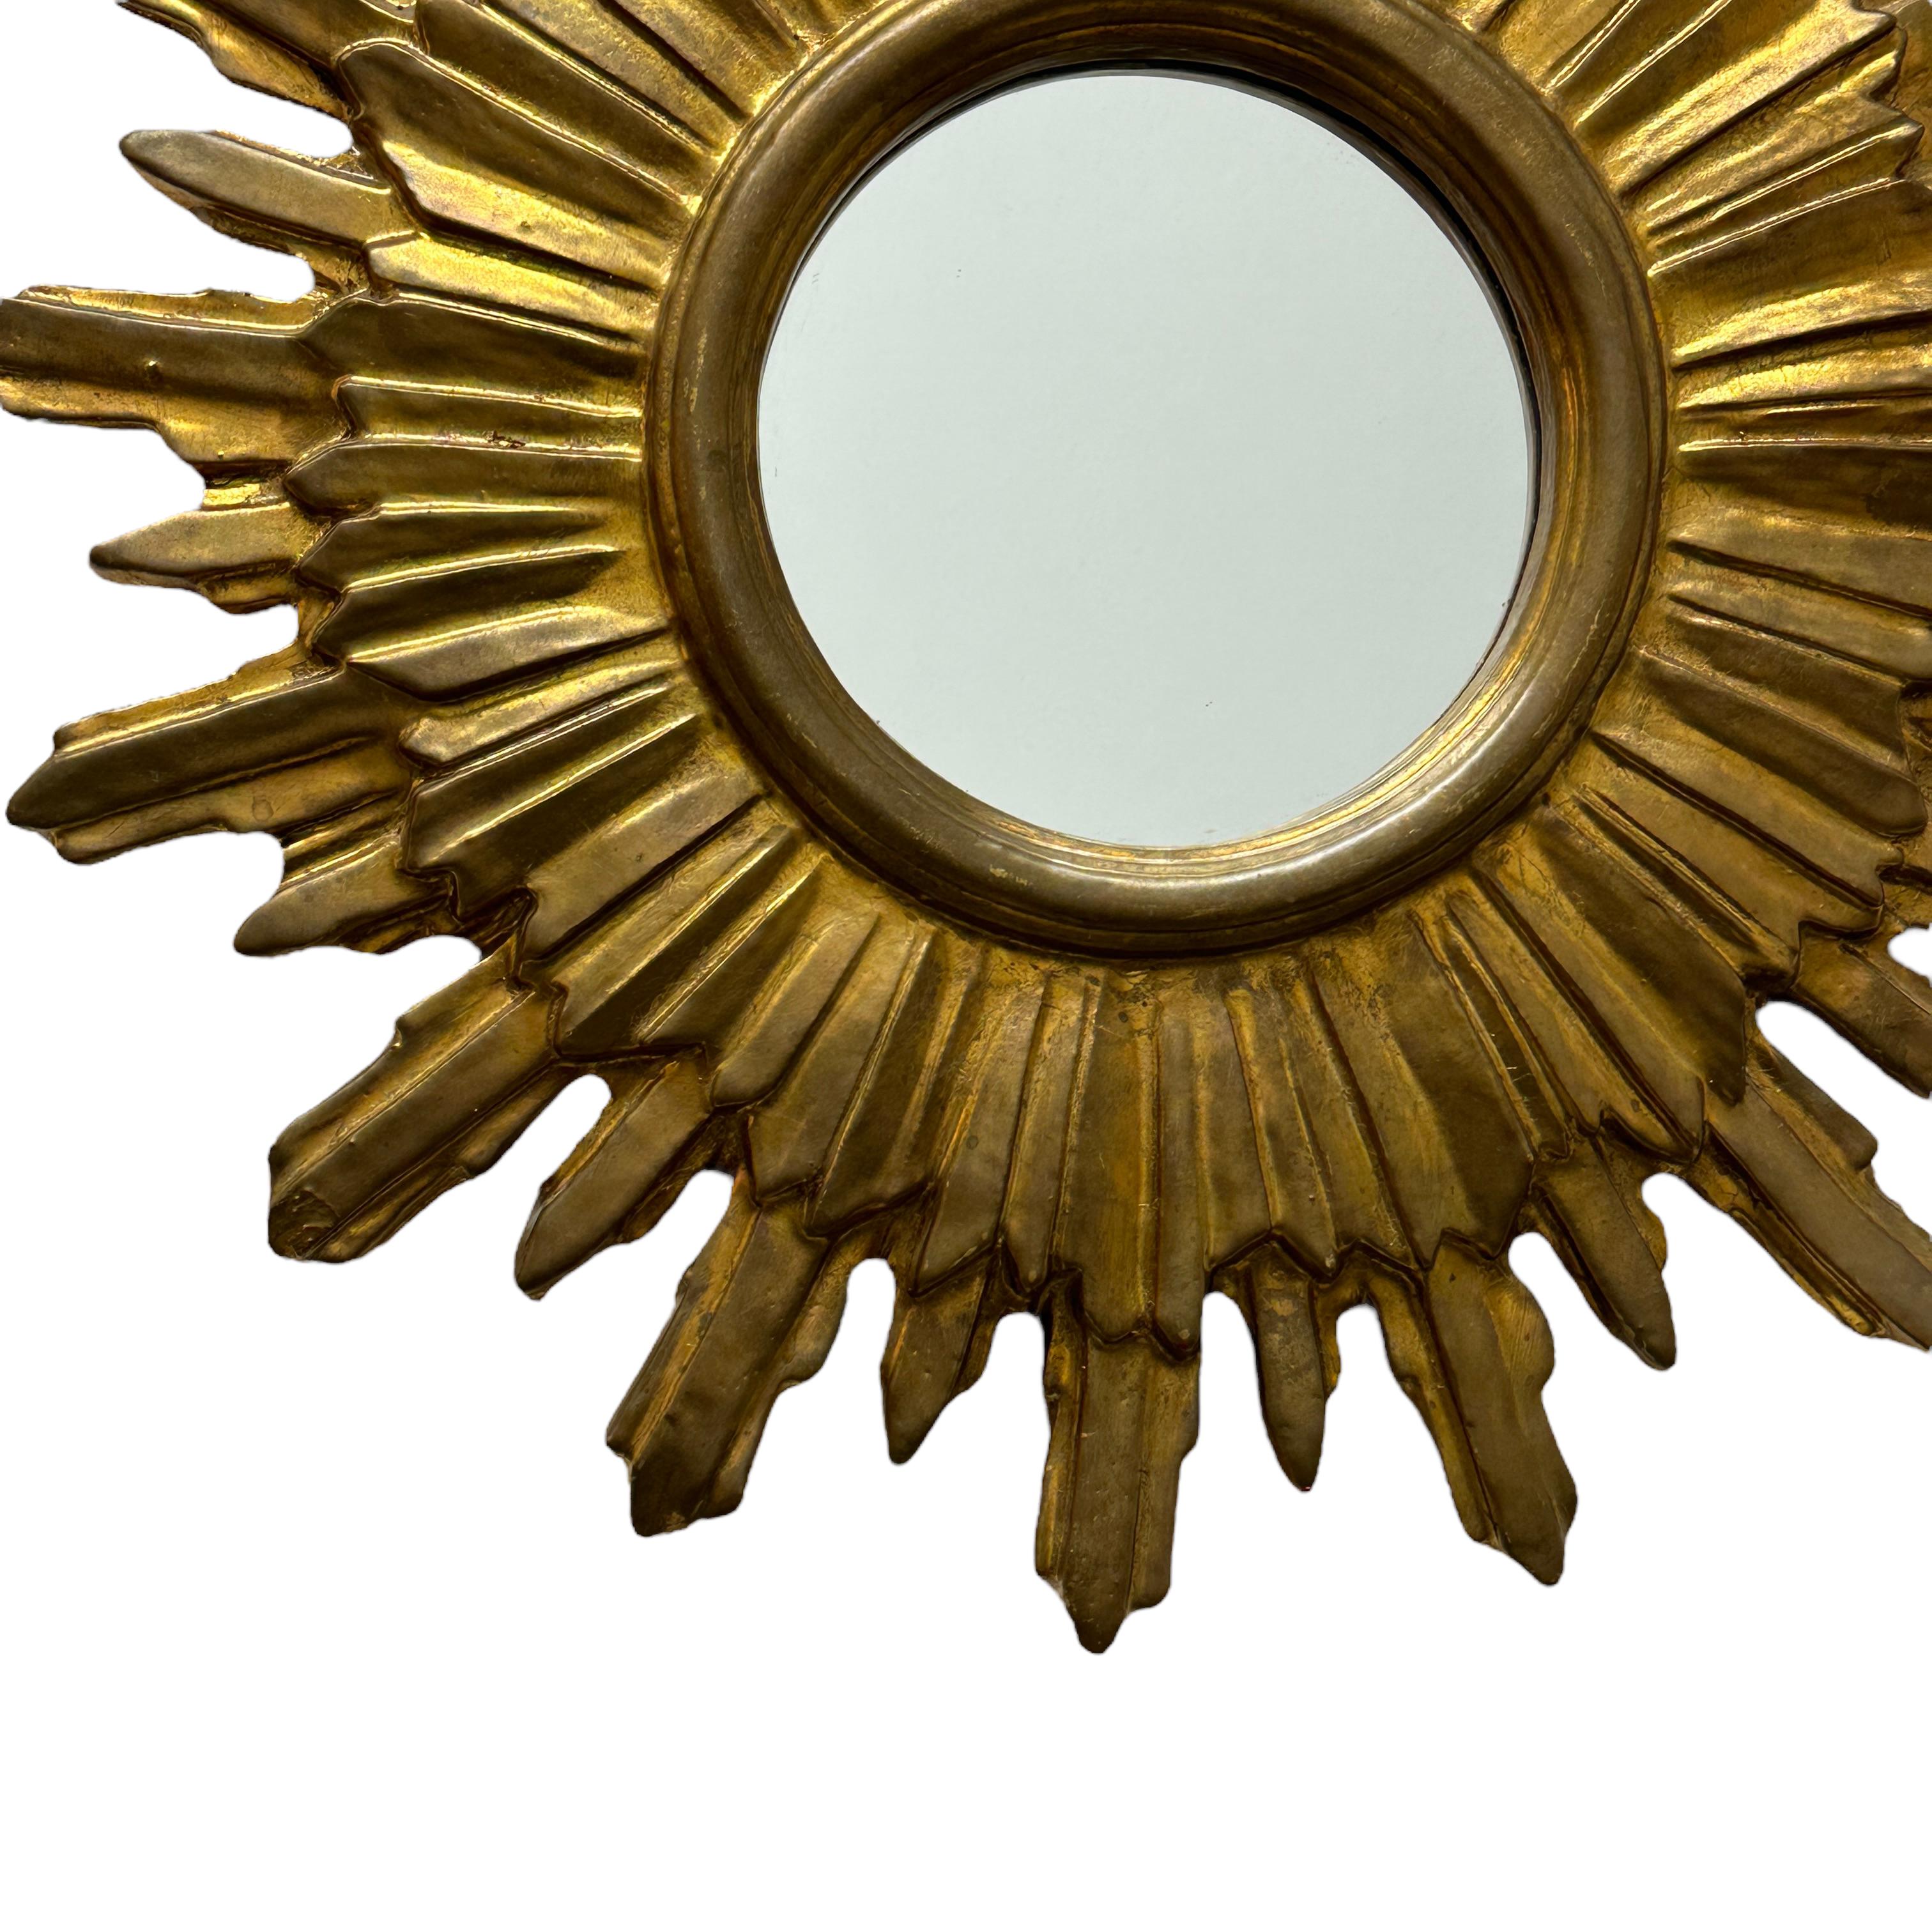 A gorgeous starburst sunburst mirror. Made of gilded wood and stucco. It measures approximate: 19.5